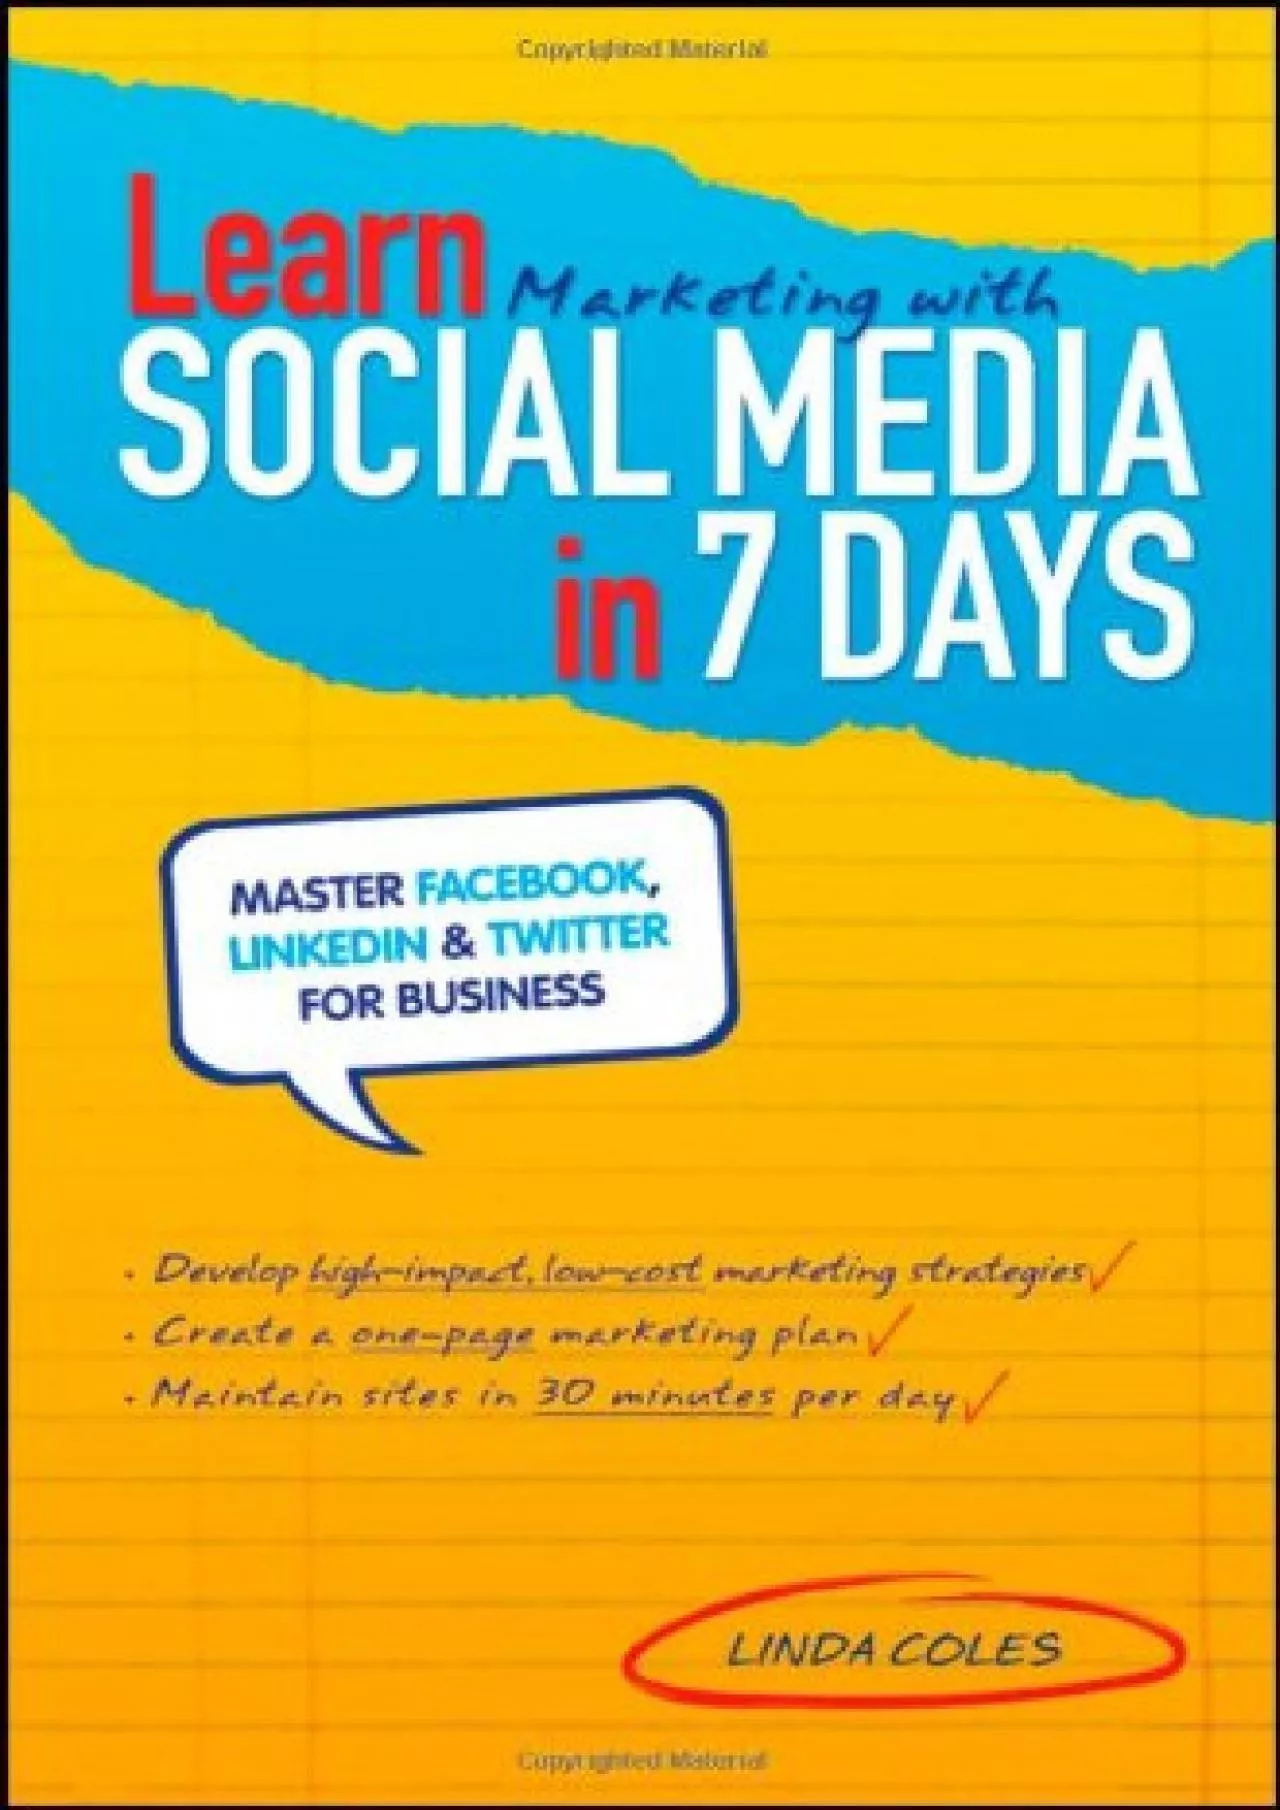 Learn Marketing with Social Media in 7 Days: Master Facebook, LinkedIn and Twitter for